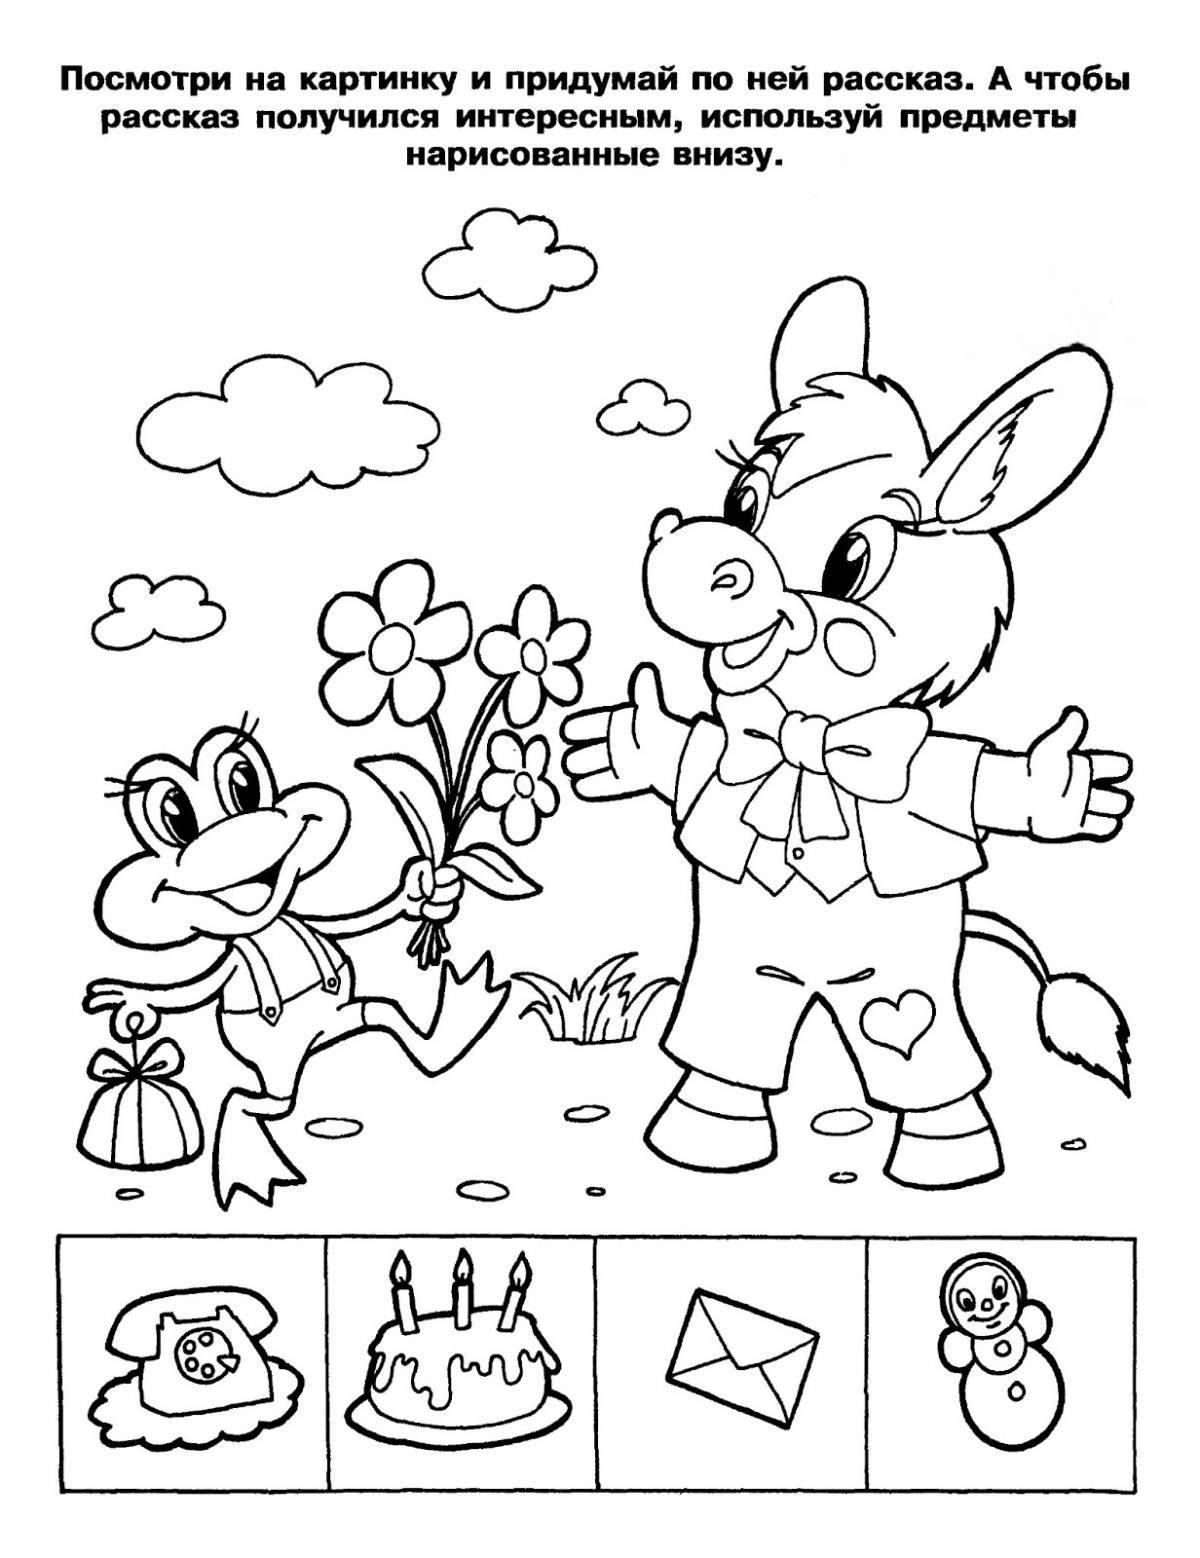 A bright coloring book for children aged 4-5